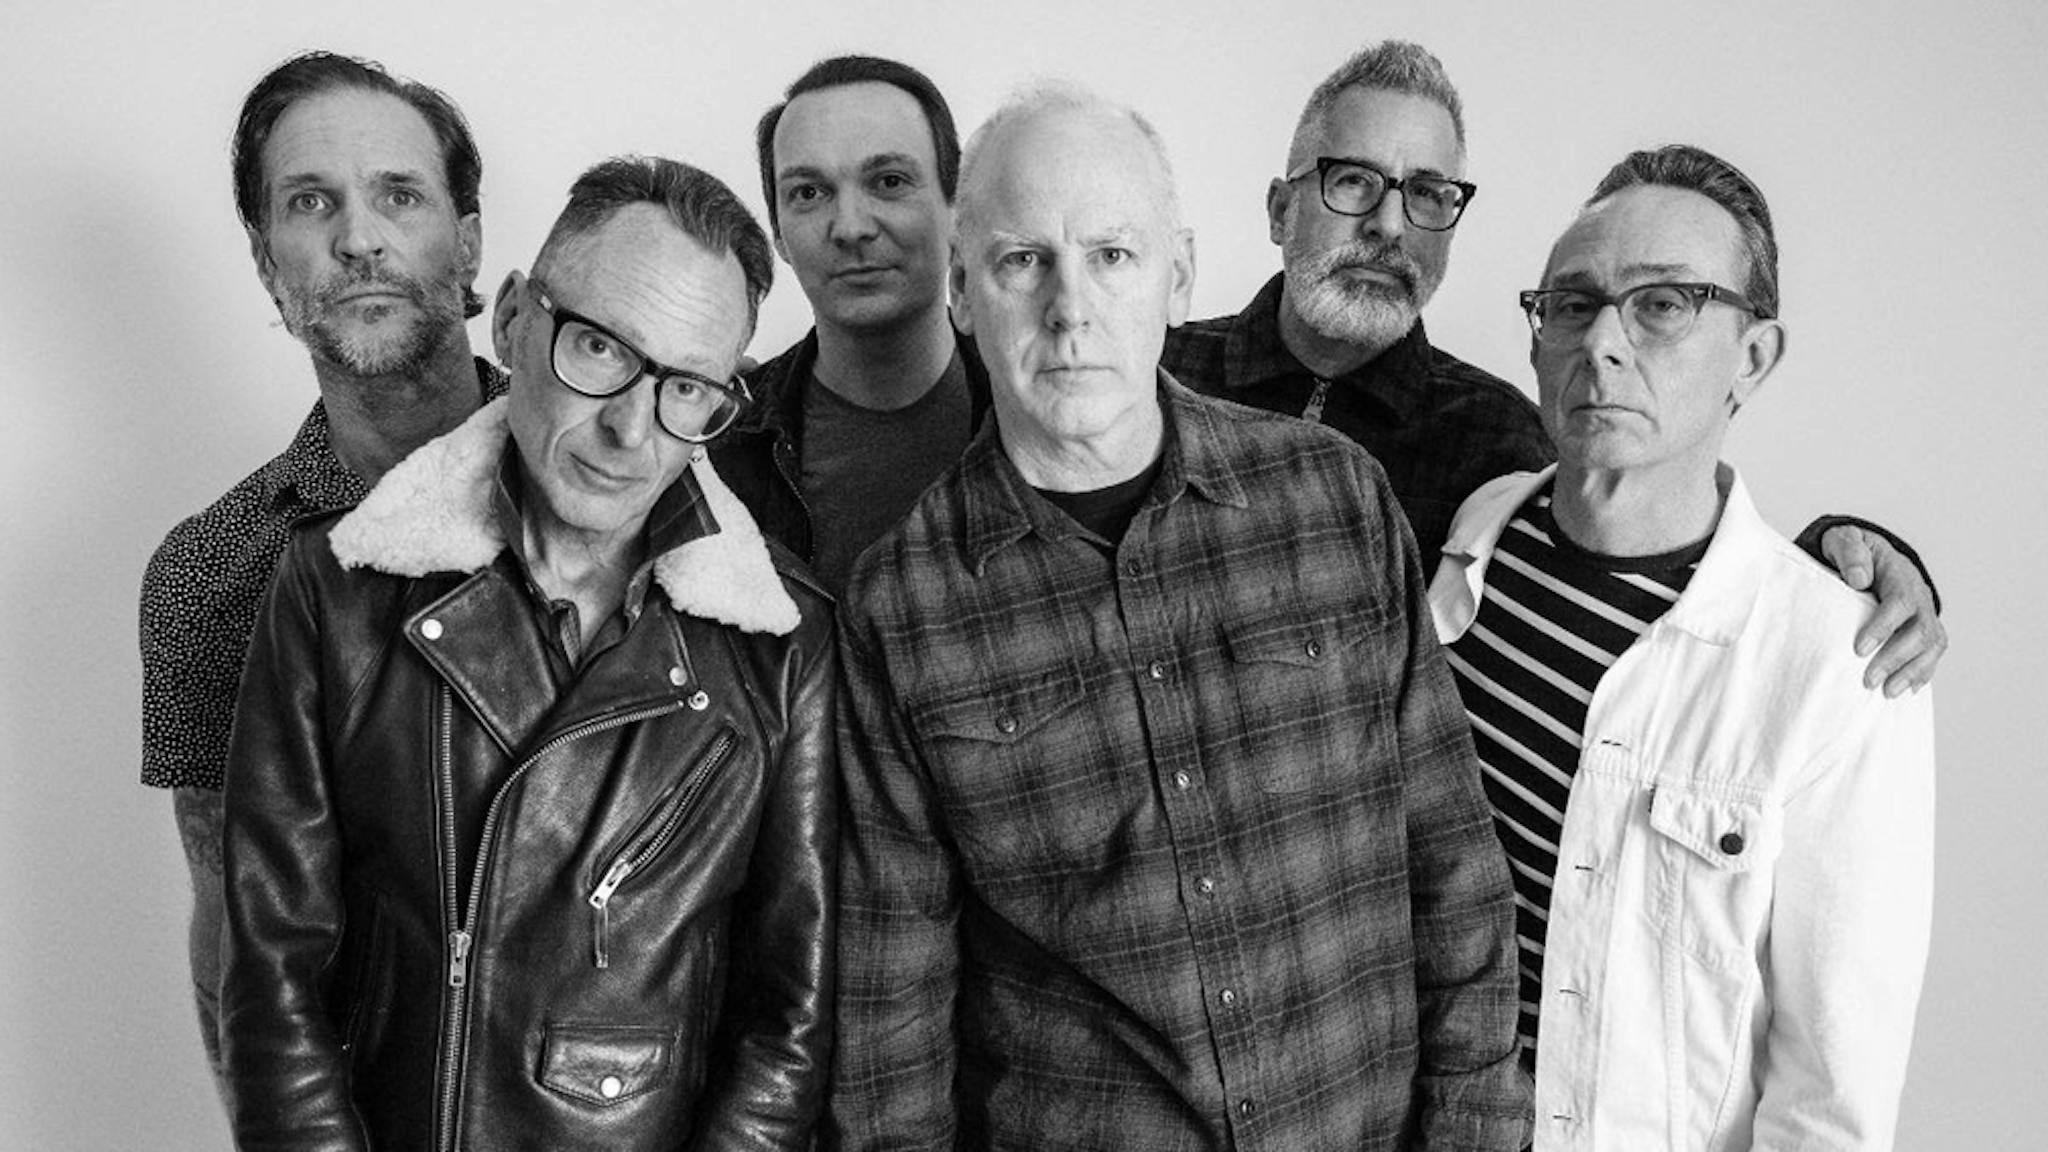 The band Bad Religion